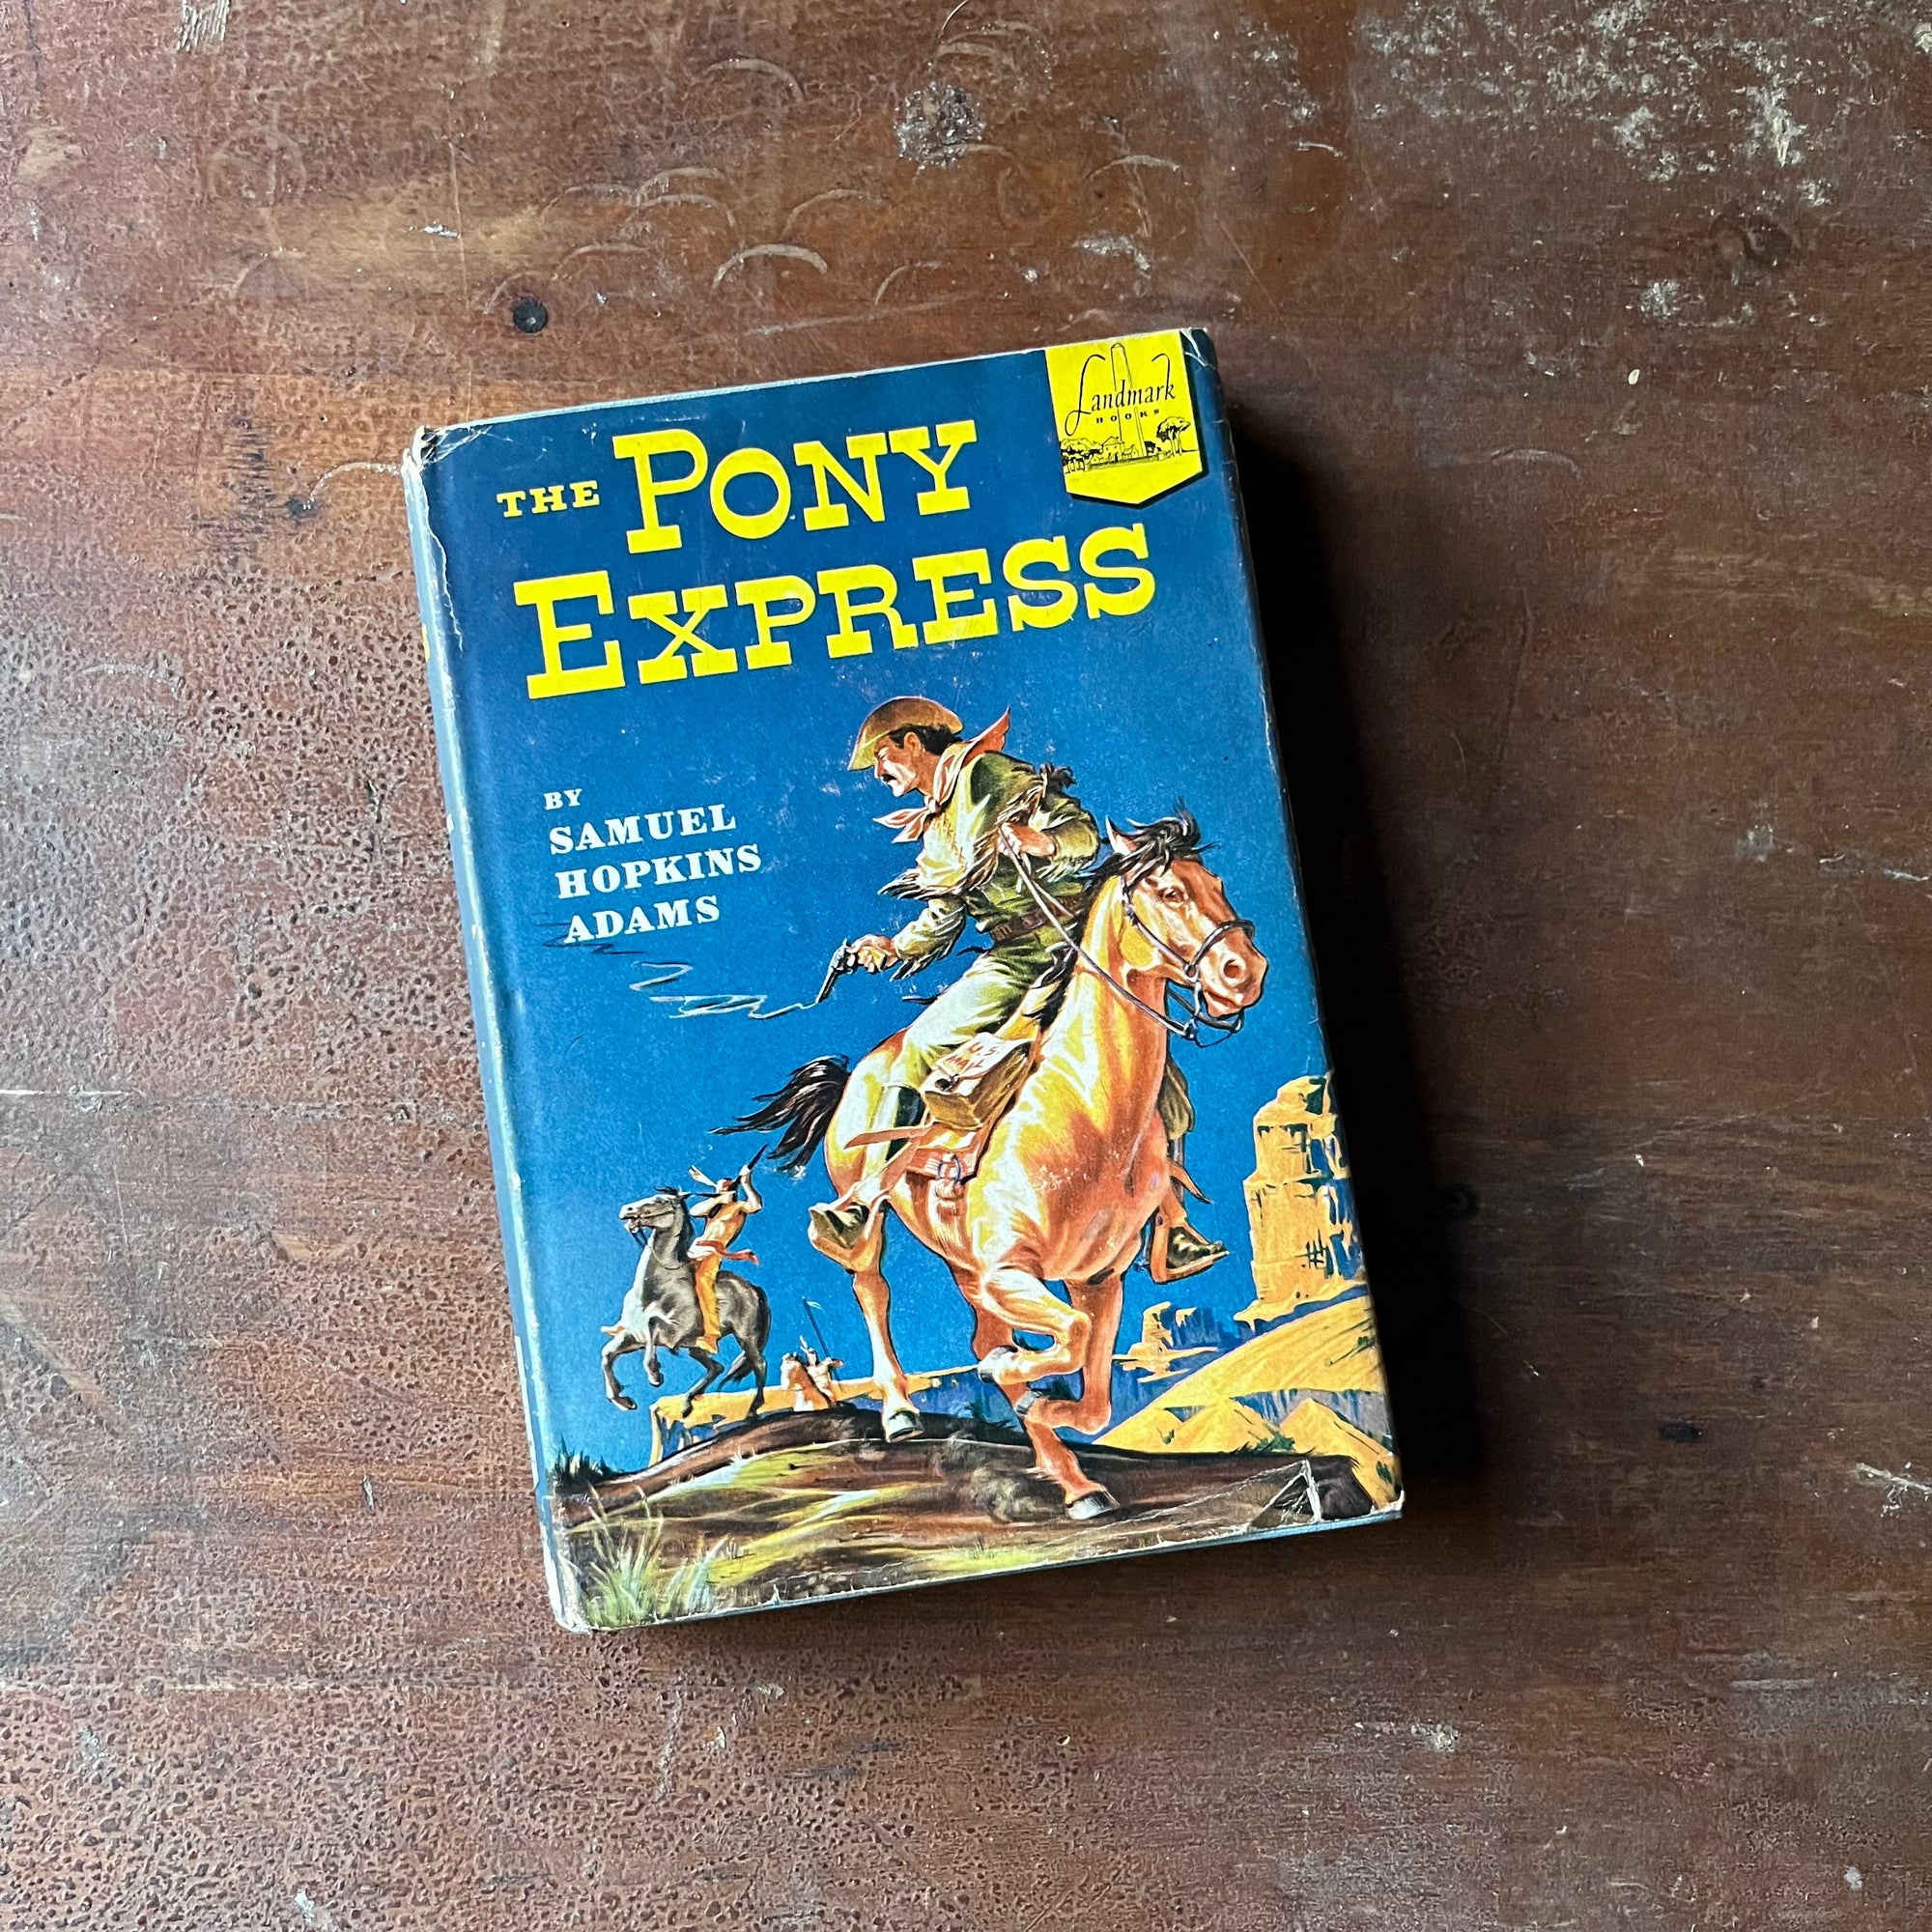 Log Cabin Vintage - vintage children's books, living history books, Landmark Series Book - The Pony Express written by Samuel Hopkins Adams with illustrations by Lee J. Ames - view of the dust jacket's front cover depicting a pony express rider being chase by Indians